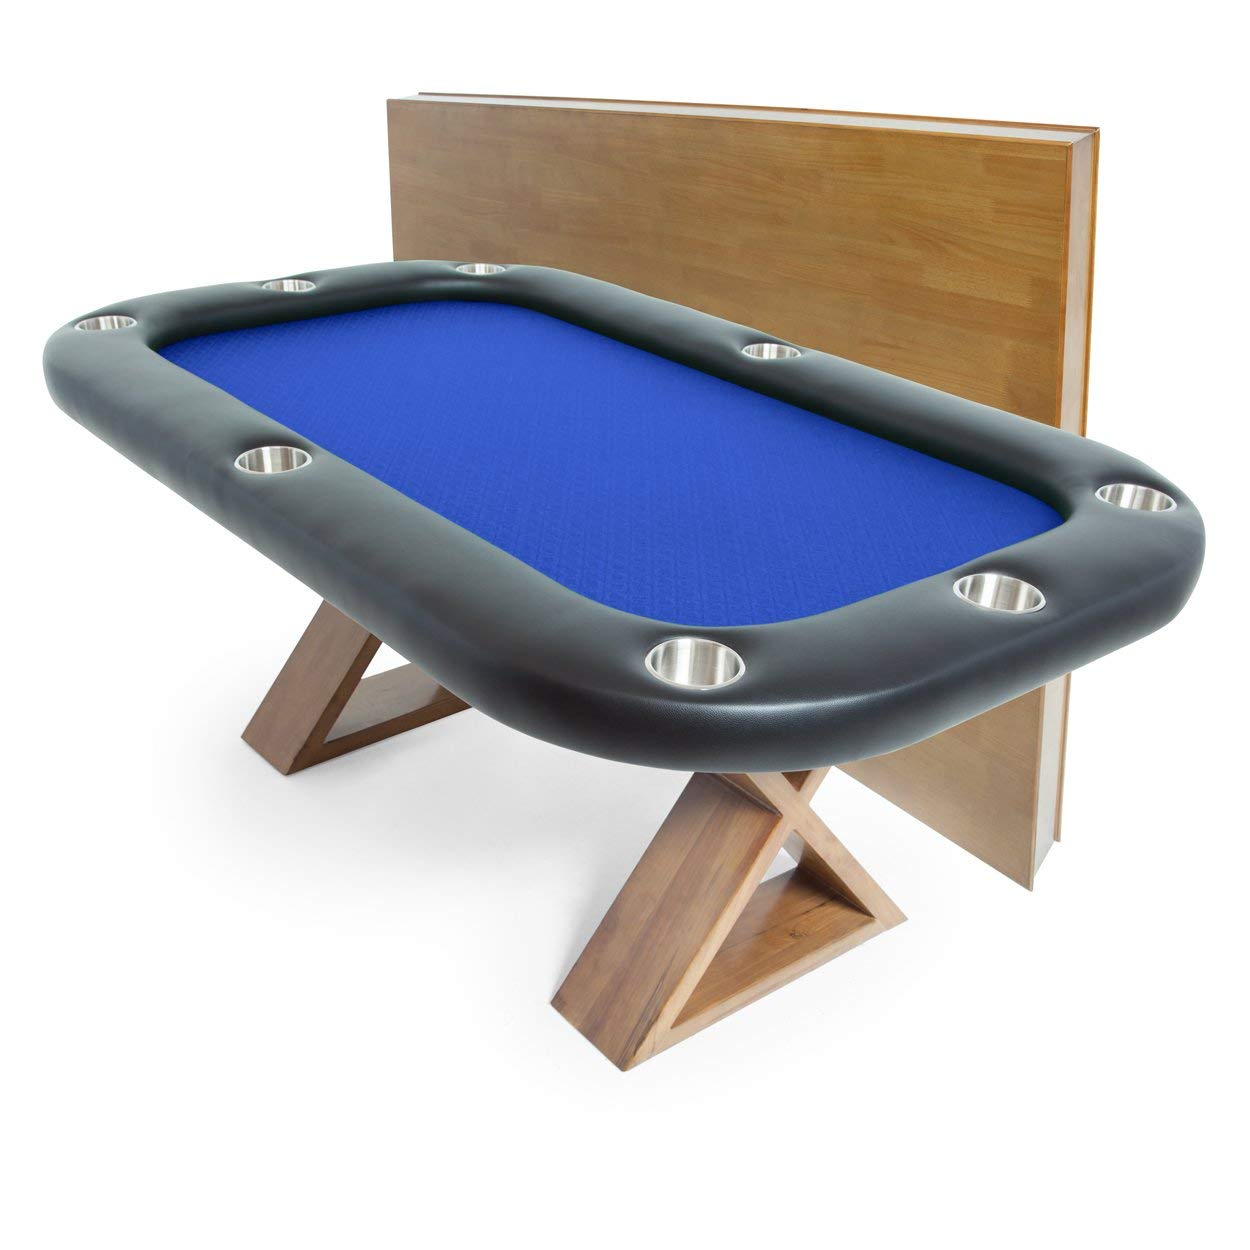 BBO Poker Tables Helmsley Dining Poker Table 8 Person with Dining Top - Gaming Blaze